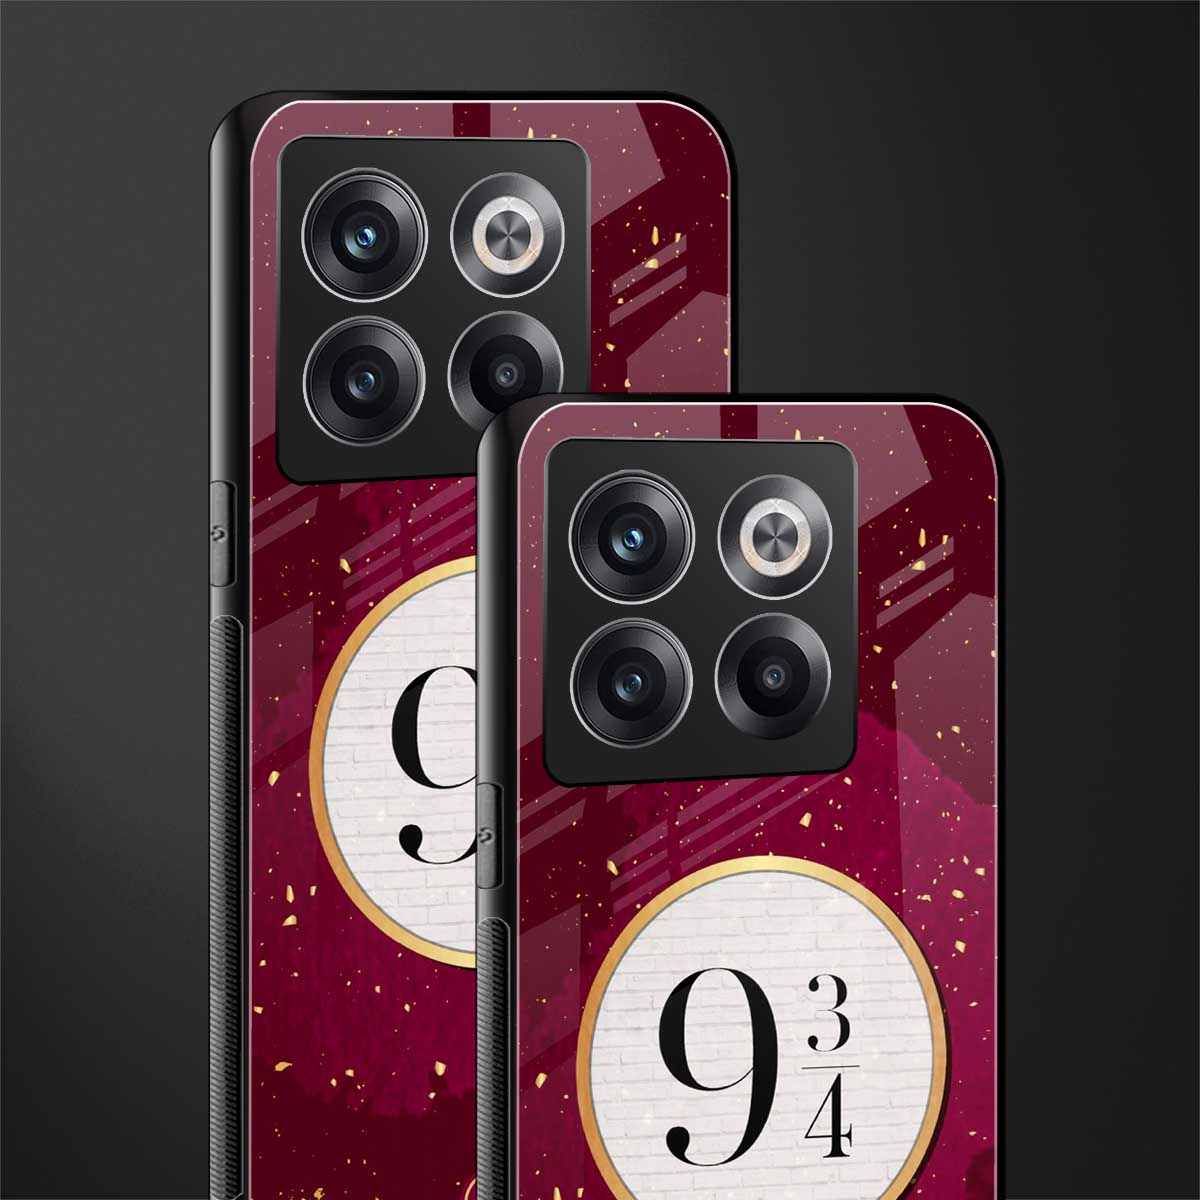 platform nine and three-quarters back phone cover | glass case for oneplus 10t